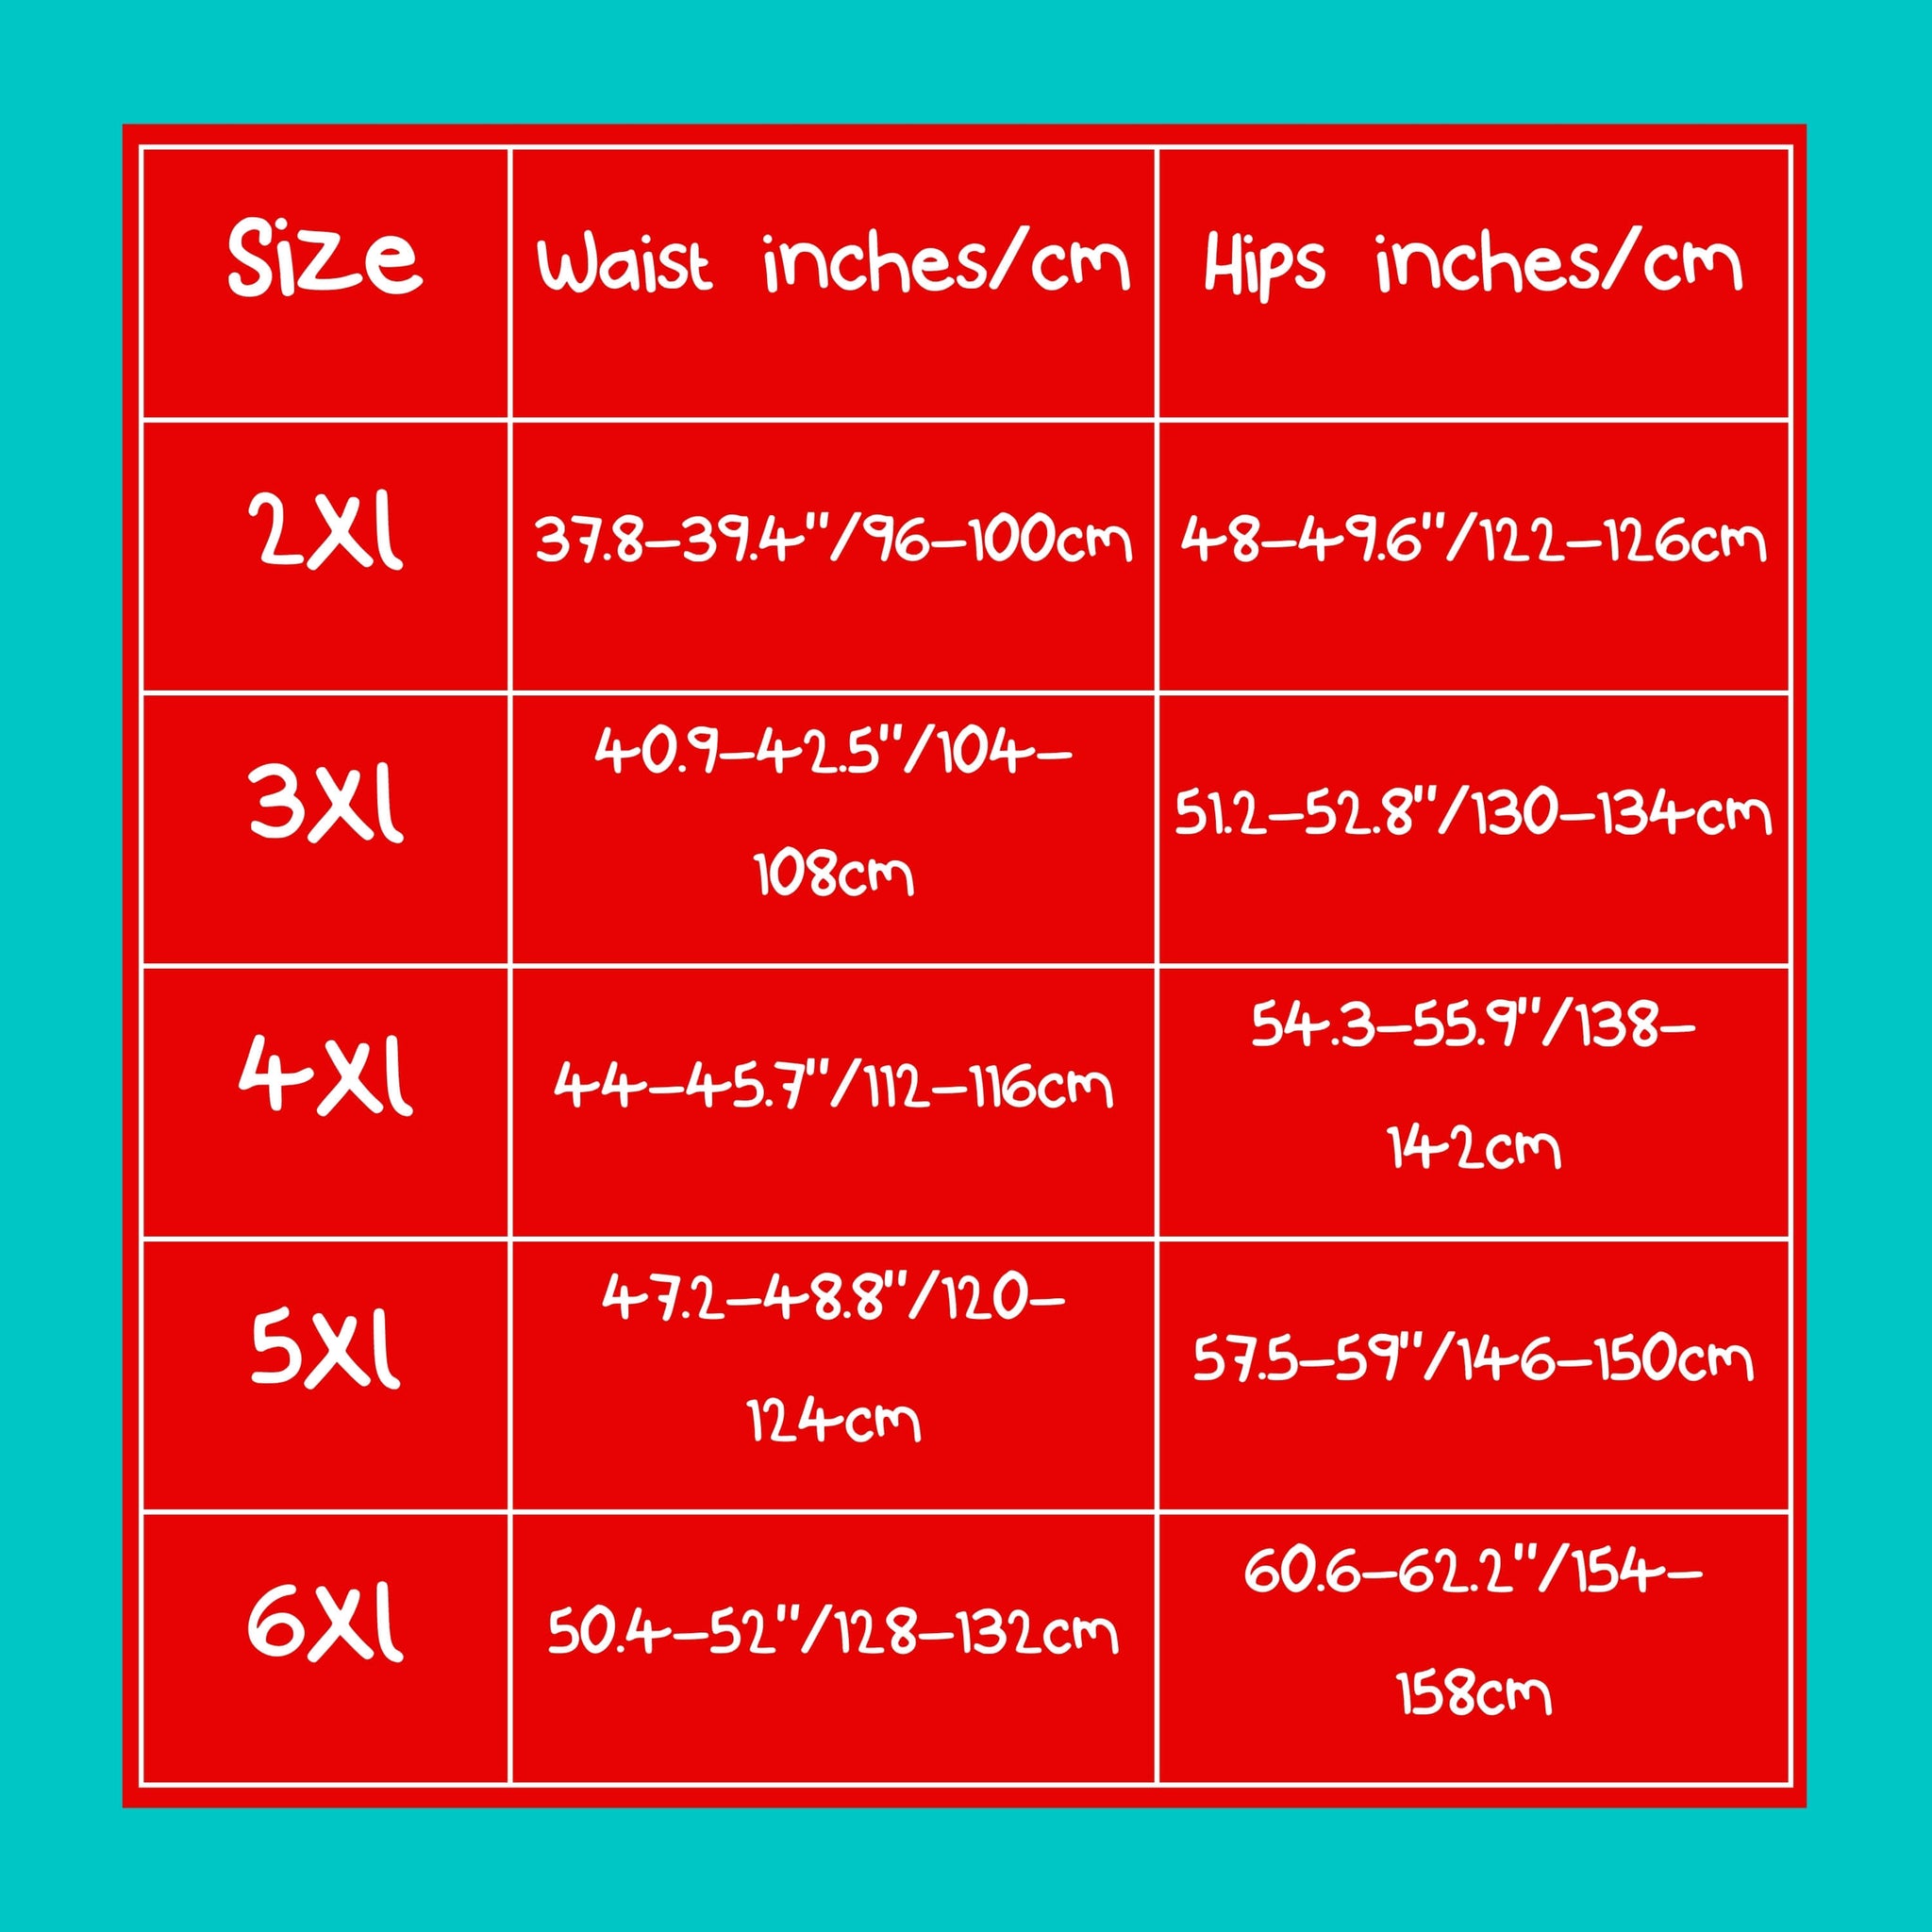 Blue, red and white size guide size chart measurements in inches and centimetres of the innabox neurospicy plus size leggings, raising awareness for neurodiversity.